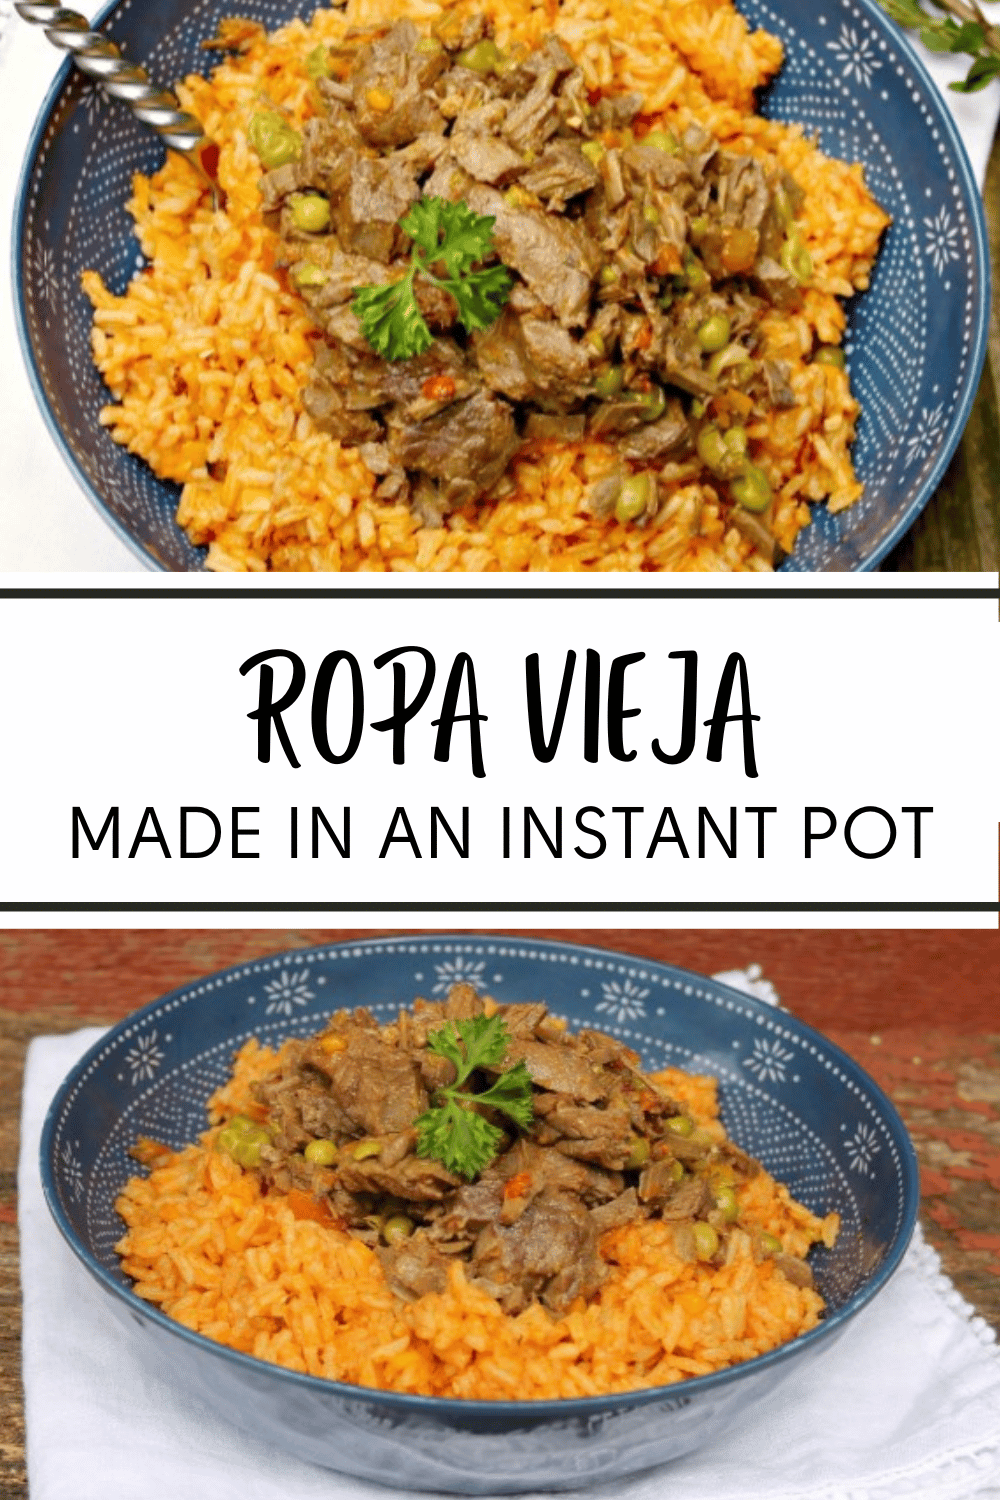 Instant Pot Ropa Vieja is the perfect combination of flavorful, tender beef and perfectly cooked veggies. It’s a delicious, hearty meal. #instantpot #pressurecooker #ropavieja #instantpotropavieja via @wondermomwannab